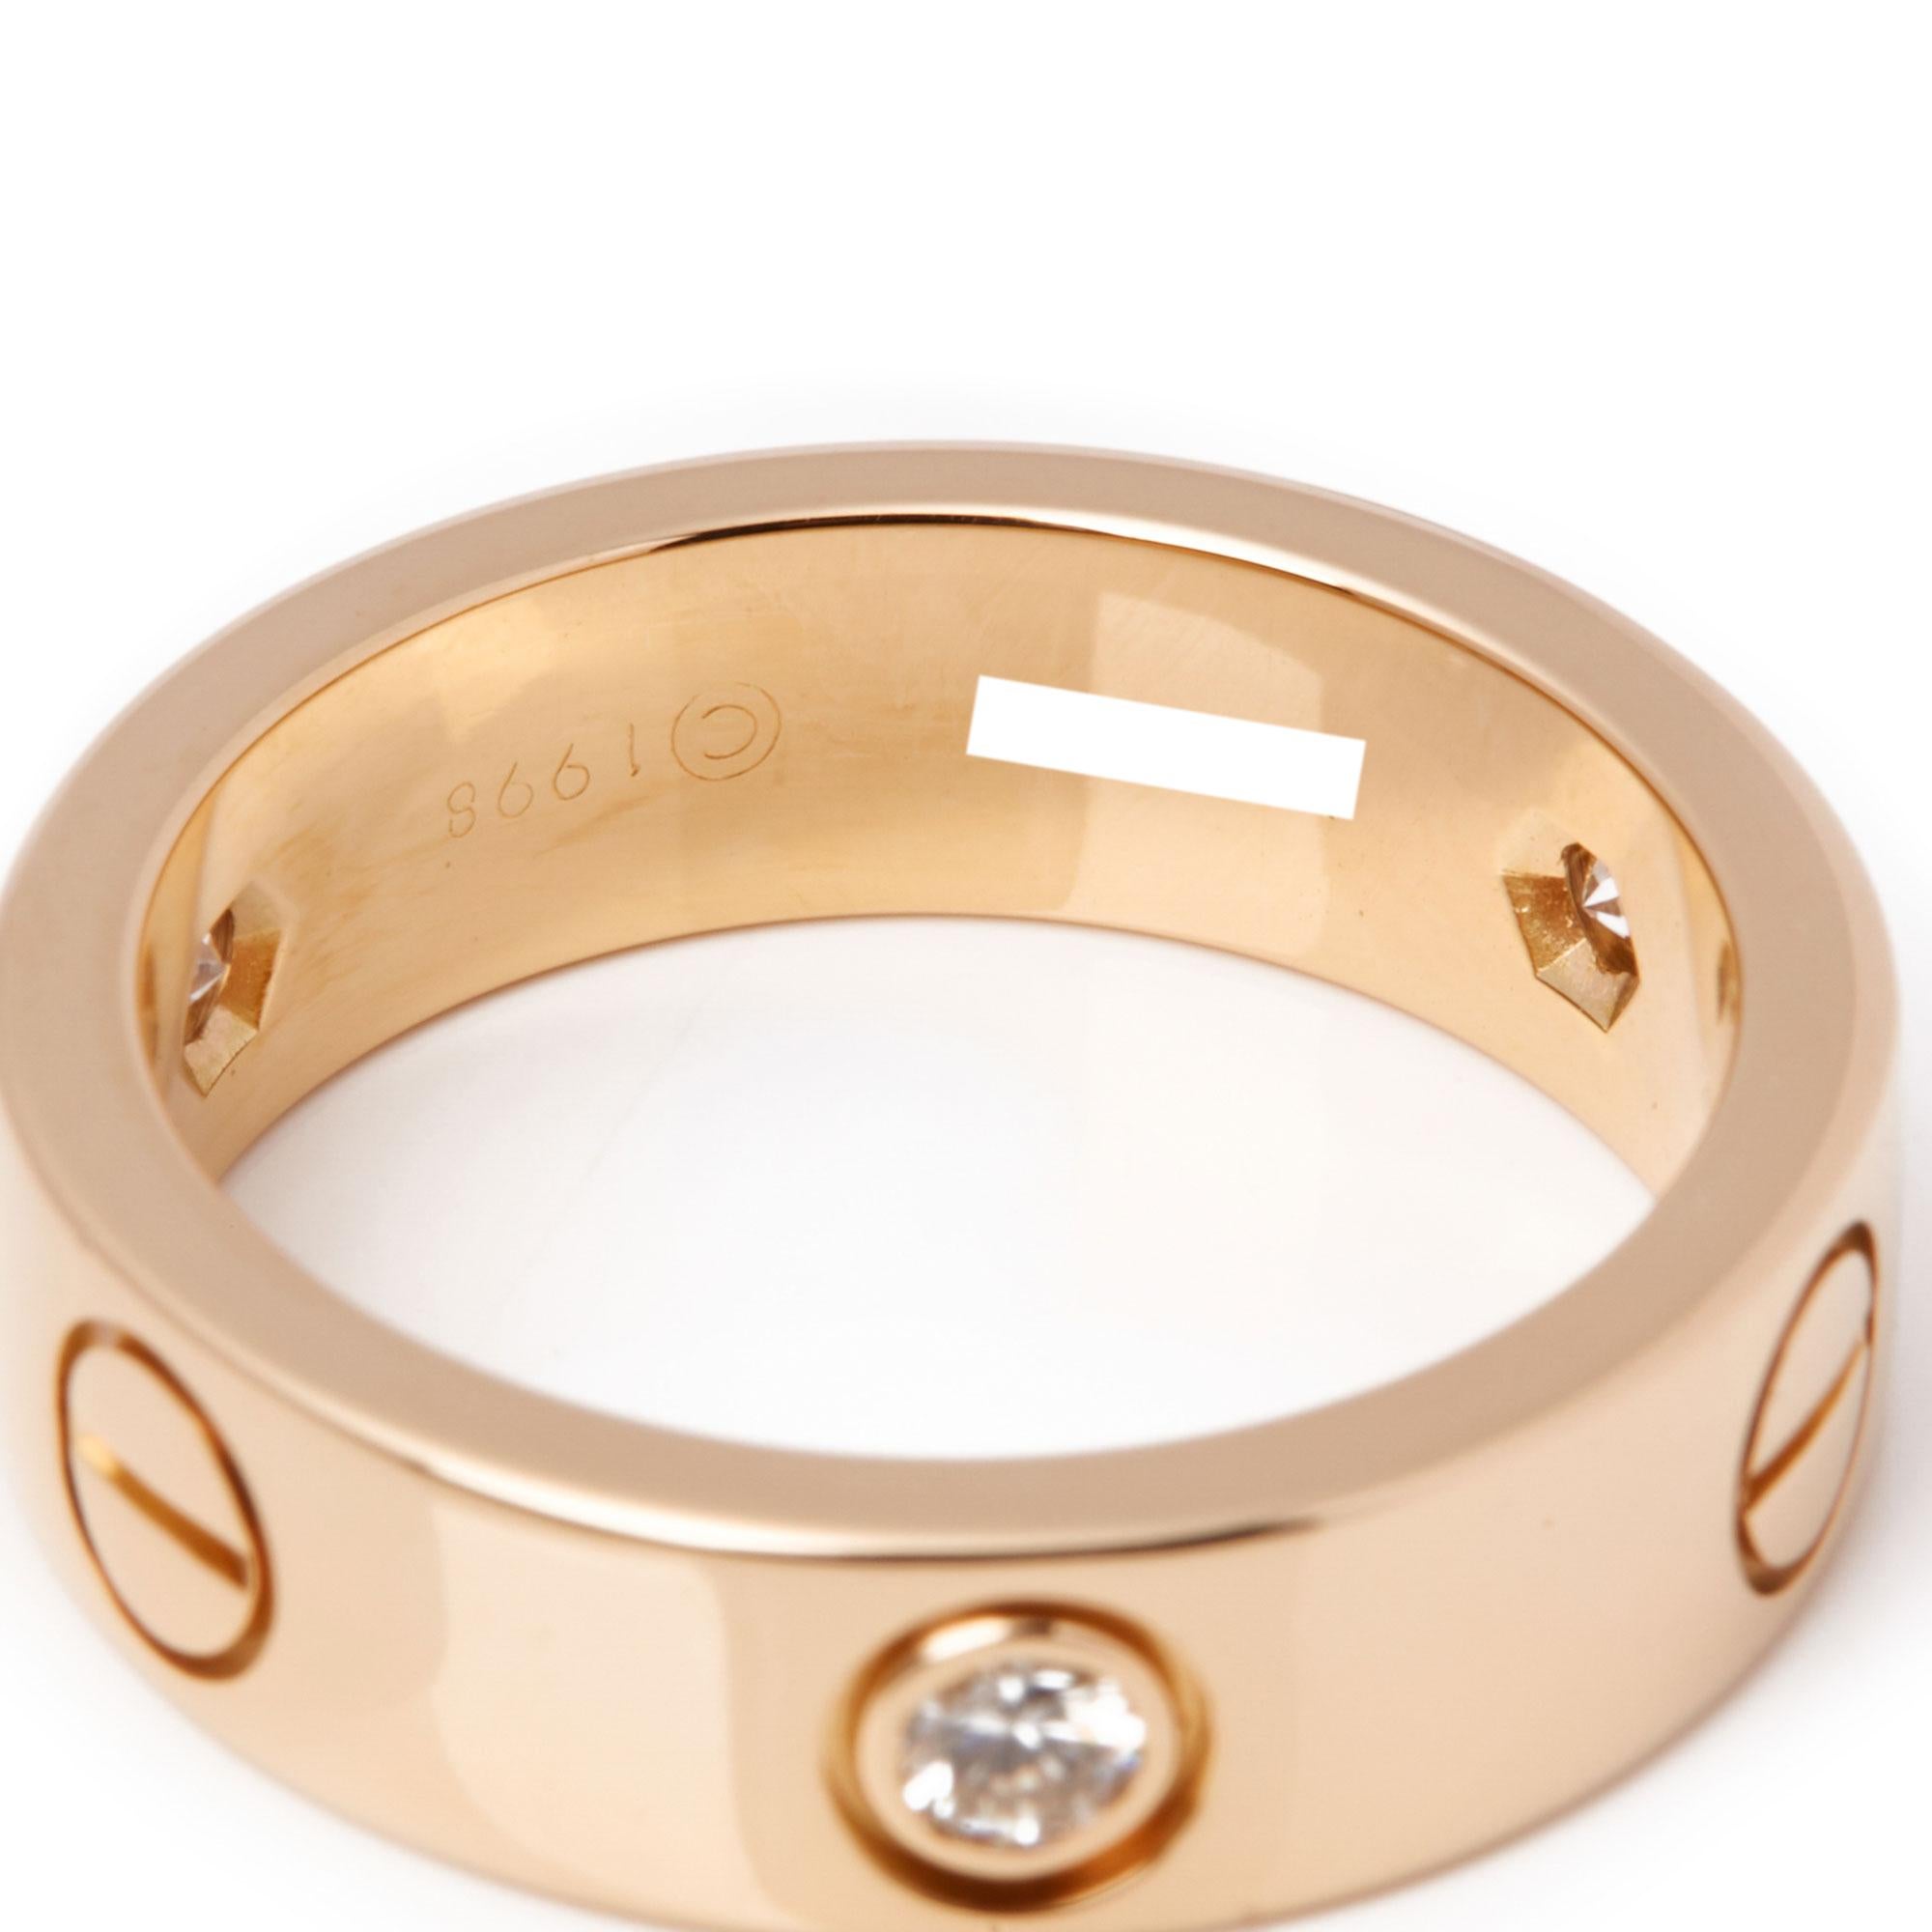 This ring by Cartier is from their Love collection and features three diamonds set with iconic screw detail on a band ring. UK ring size L 1/2. EU ring size 52. US ring size 6. Complete with Xupes presentation box. Our Xupes reference is COMJ488